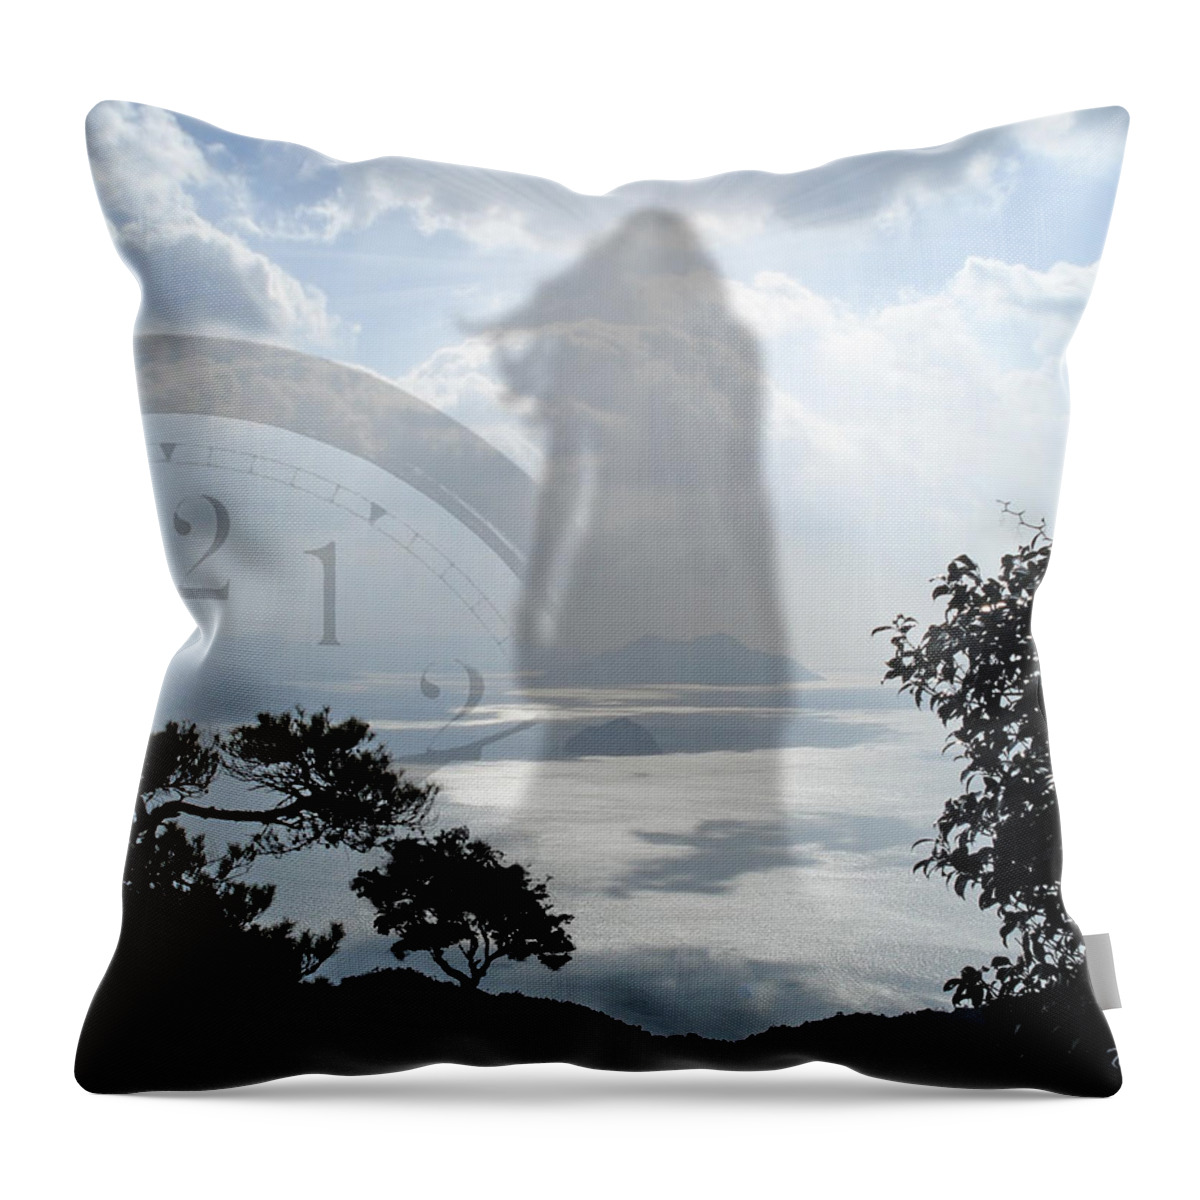 Fine Art Throw Pillow featuring the digital art Eleven Eleven by Torie Tiffany